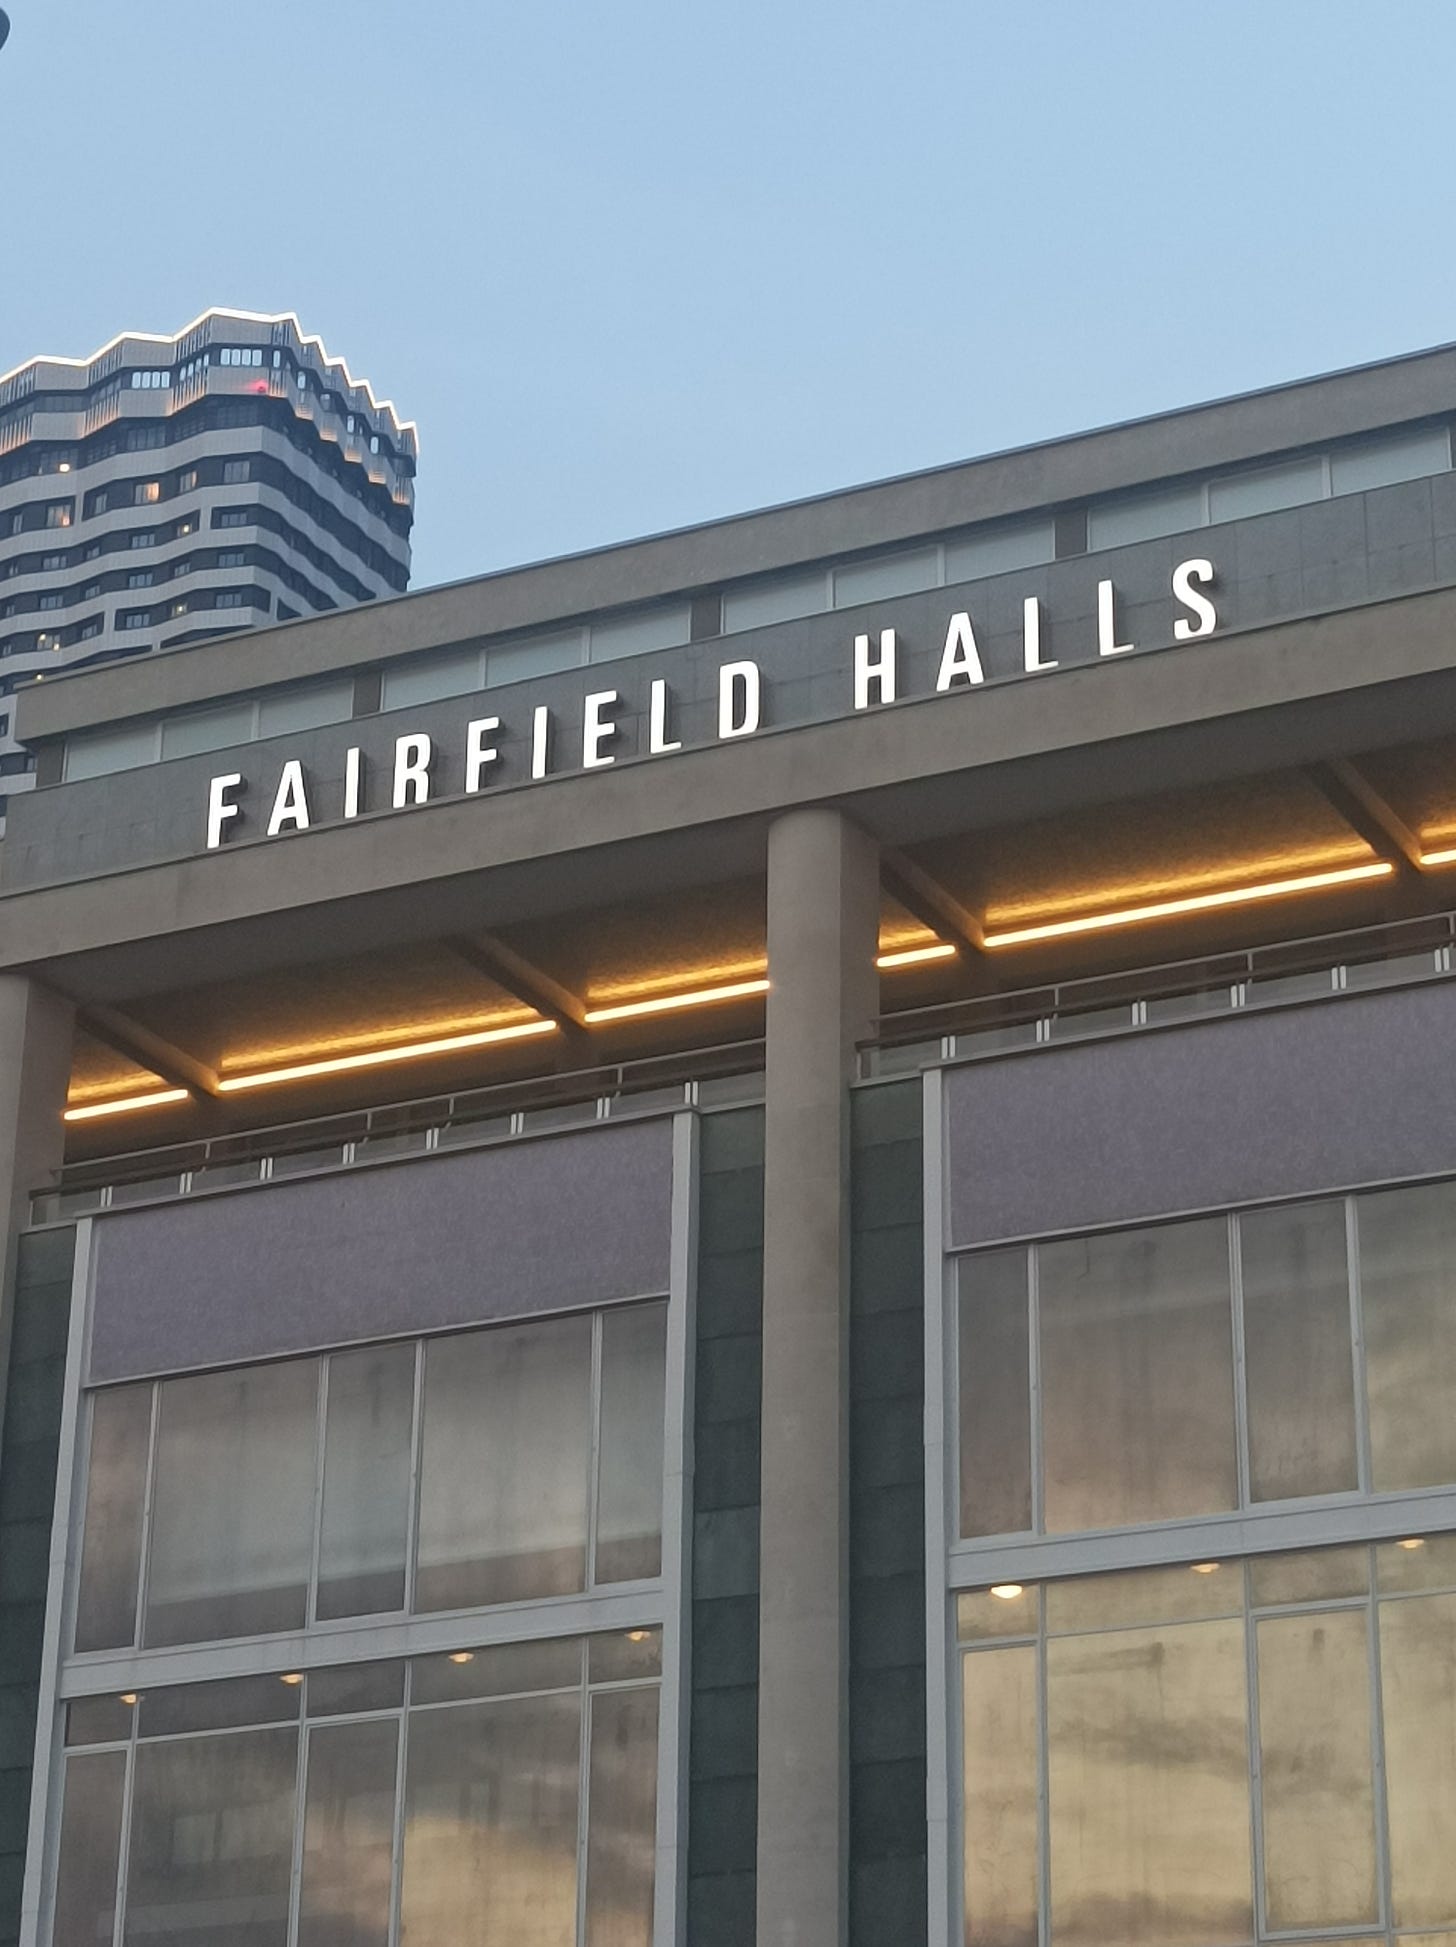 Close up of the Fairfield Halls entrance